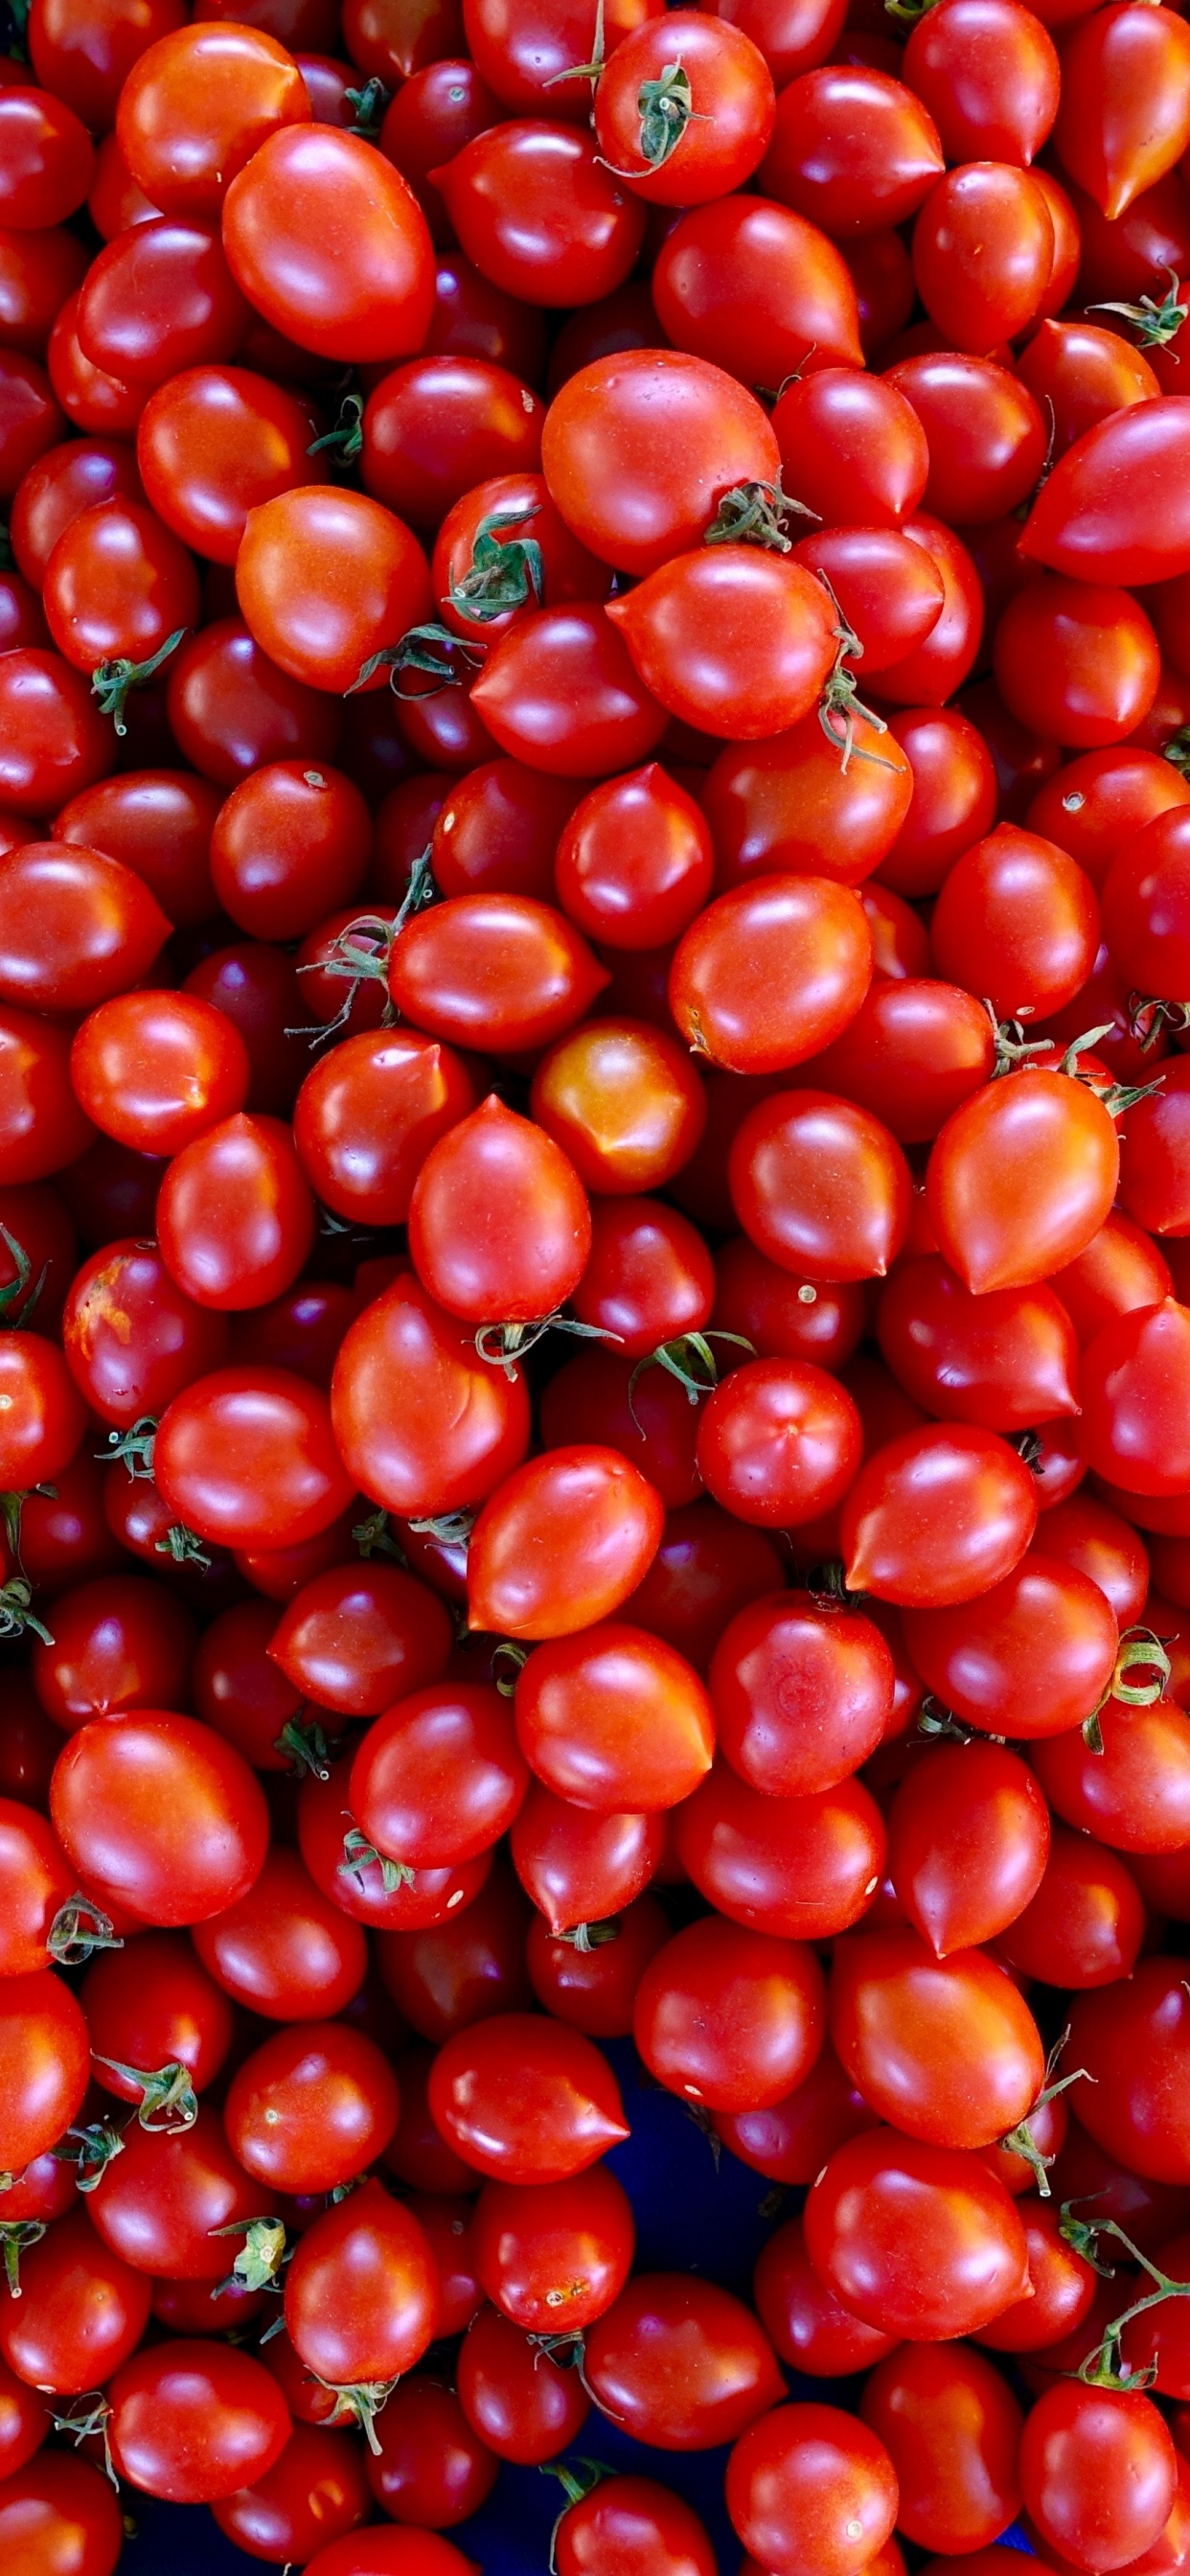 Red Round Fruits on Blue Plastic Container. Wallpaper in 1242x2688 Resolution